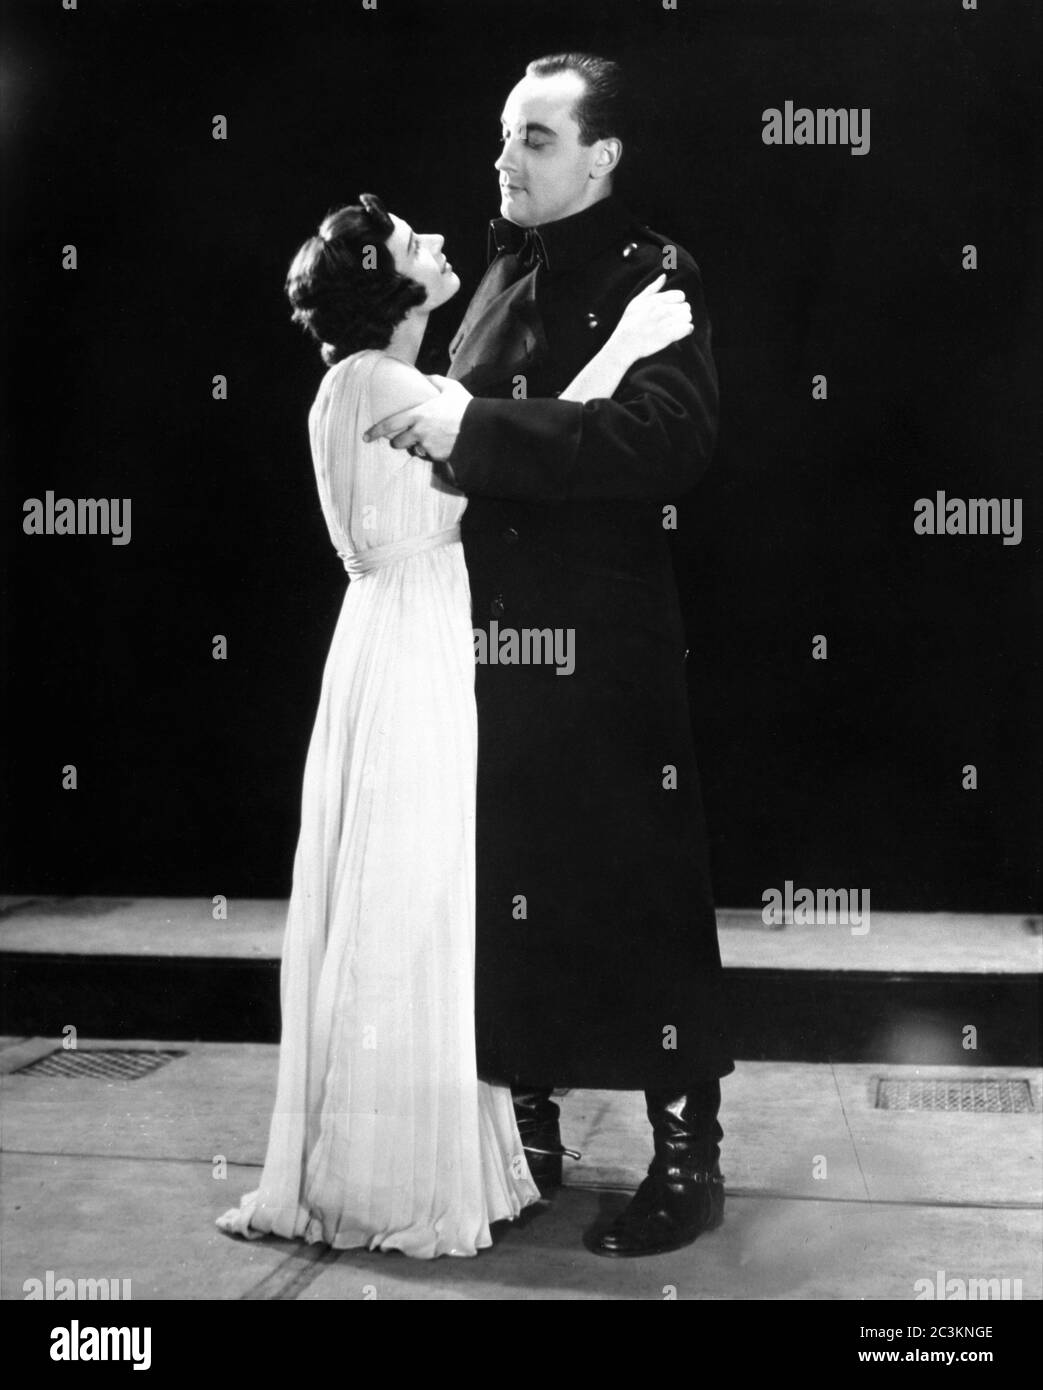 EVELYN ALLEN as Calpurnia and JOSEPH HOLLAND as Julius Caesar in The Mercury Theatre presentation THE TRAGEDY OF JULIUS CAESAR by WILLIAM SHAKESPEARE production by ORSON WELLES music MARC BLITZSTEIN November 1937 at Mercury Theatre 110 West 41st Street New York Stock Photo